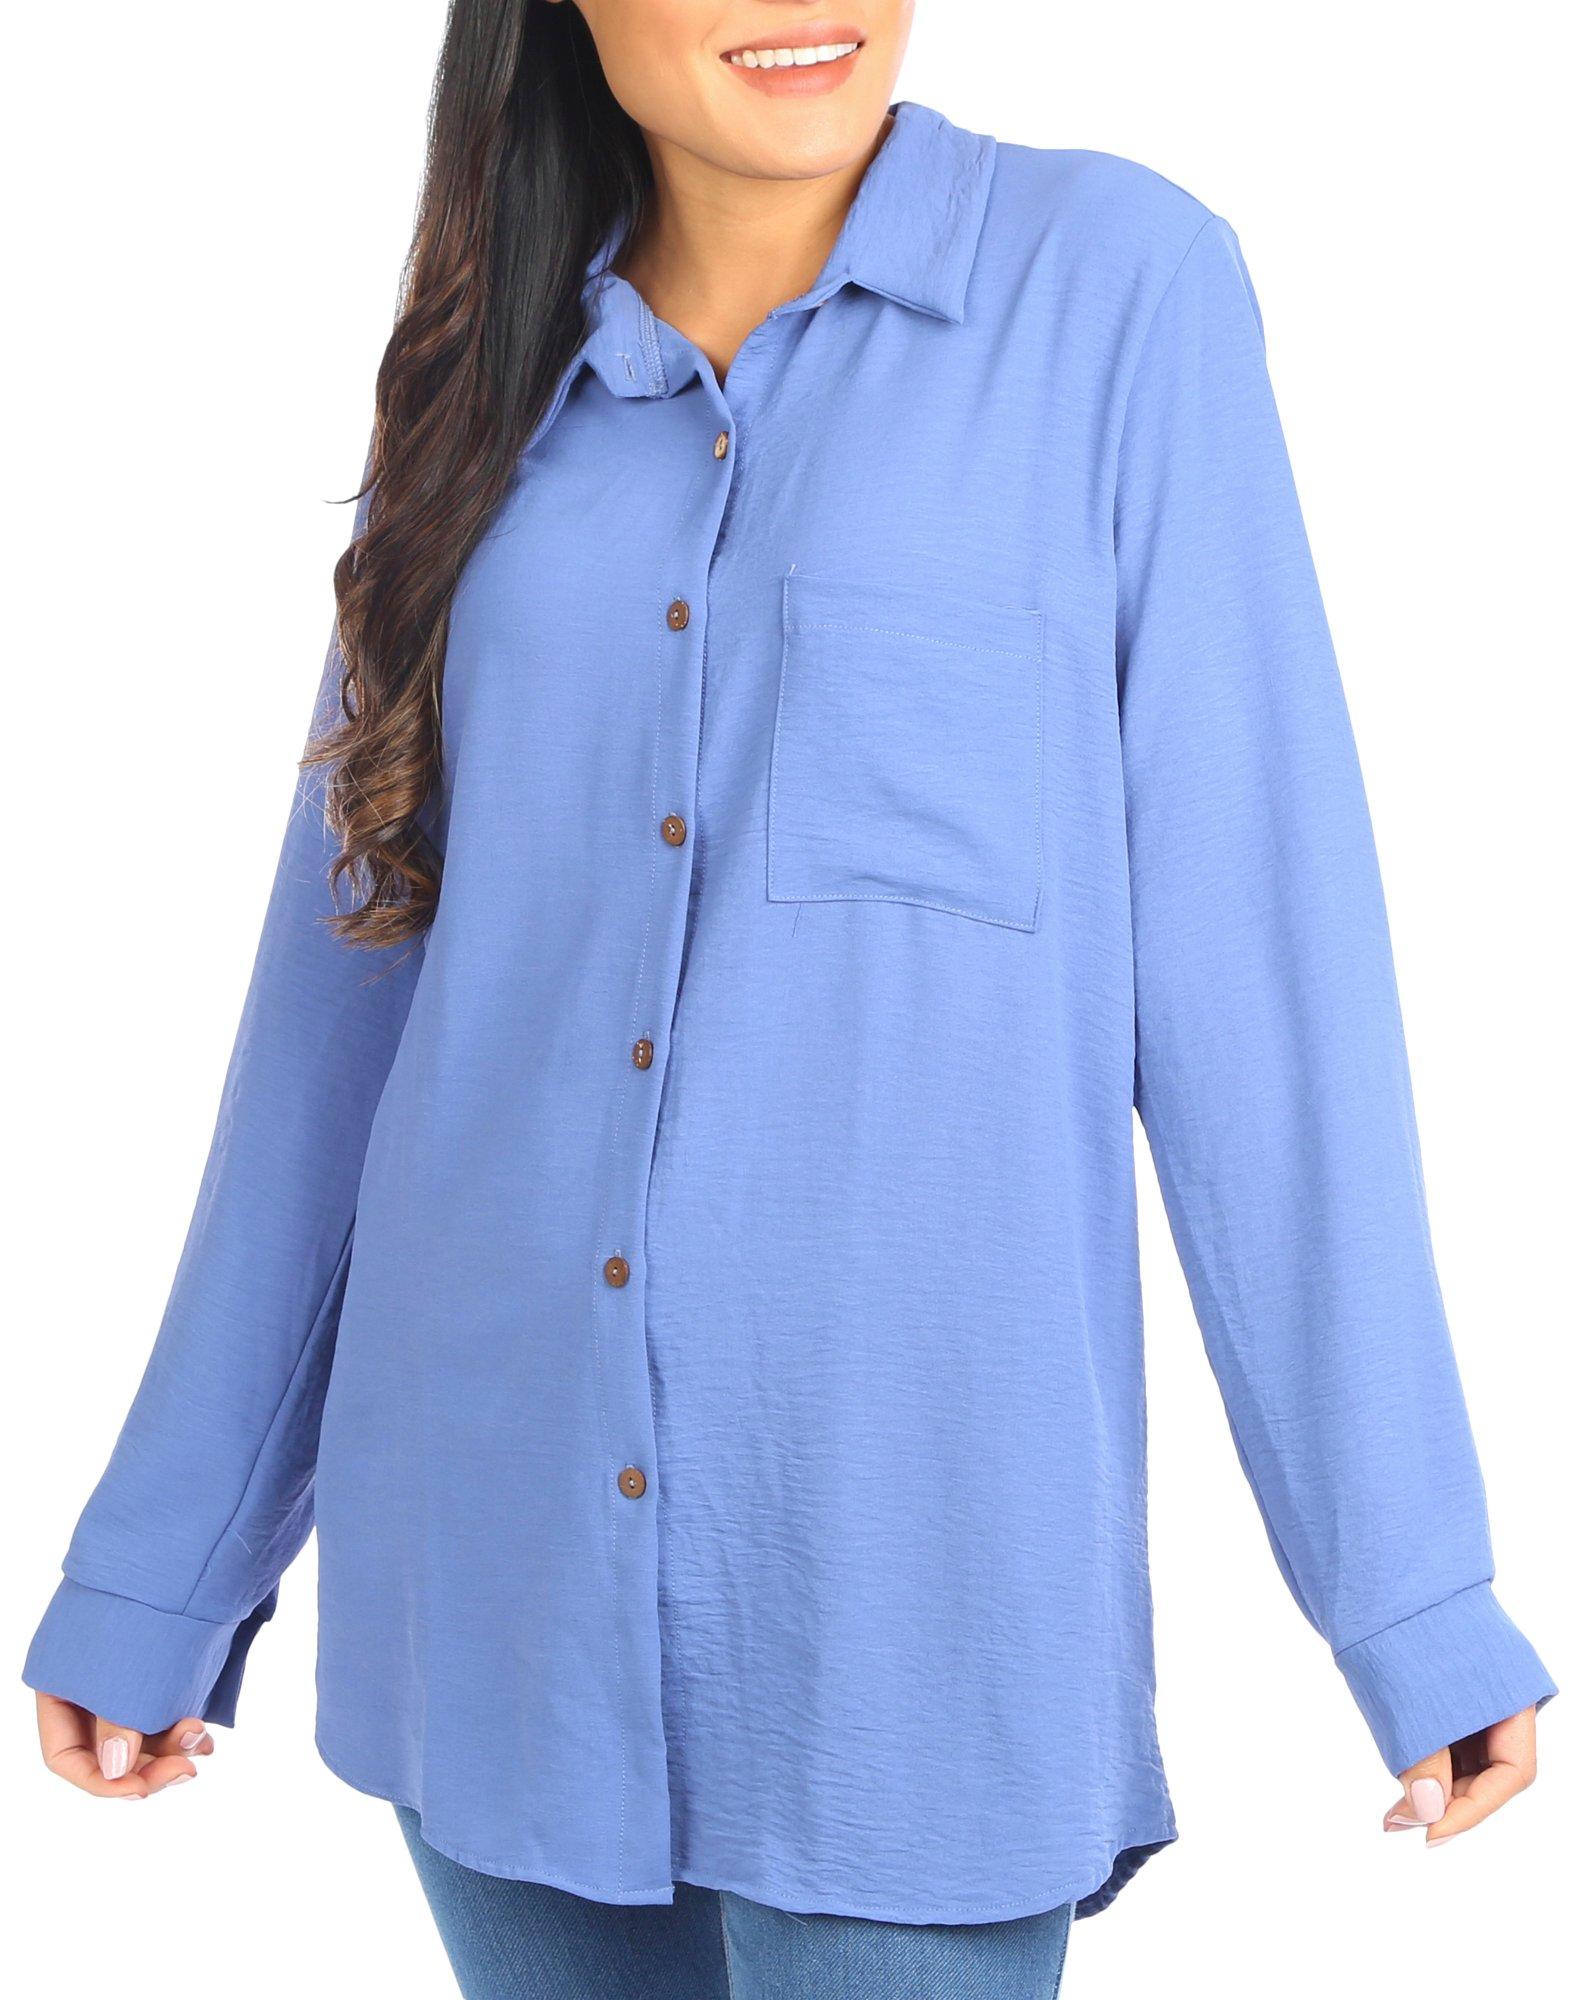 Blue Sol Womens Airflow Button 1 Pocket Long Sleeve Top